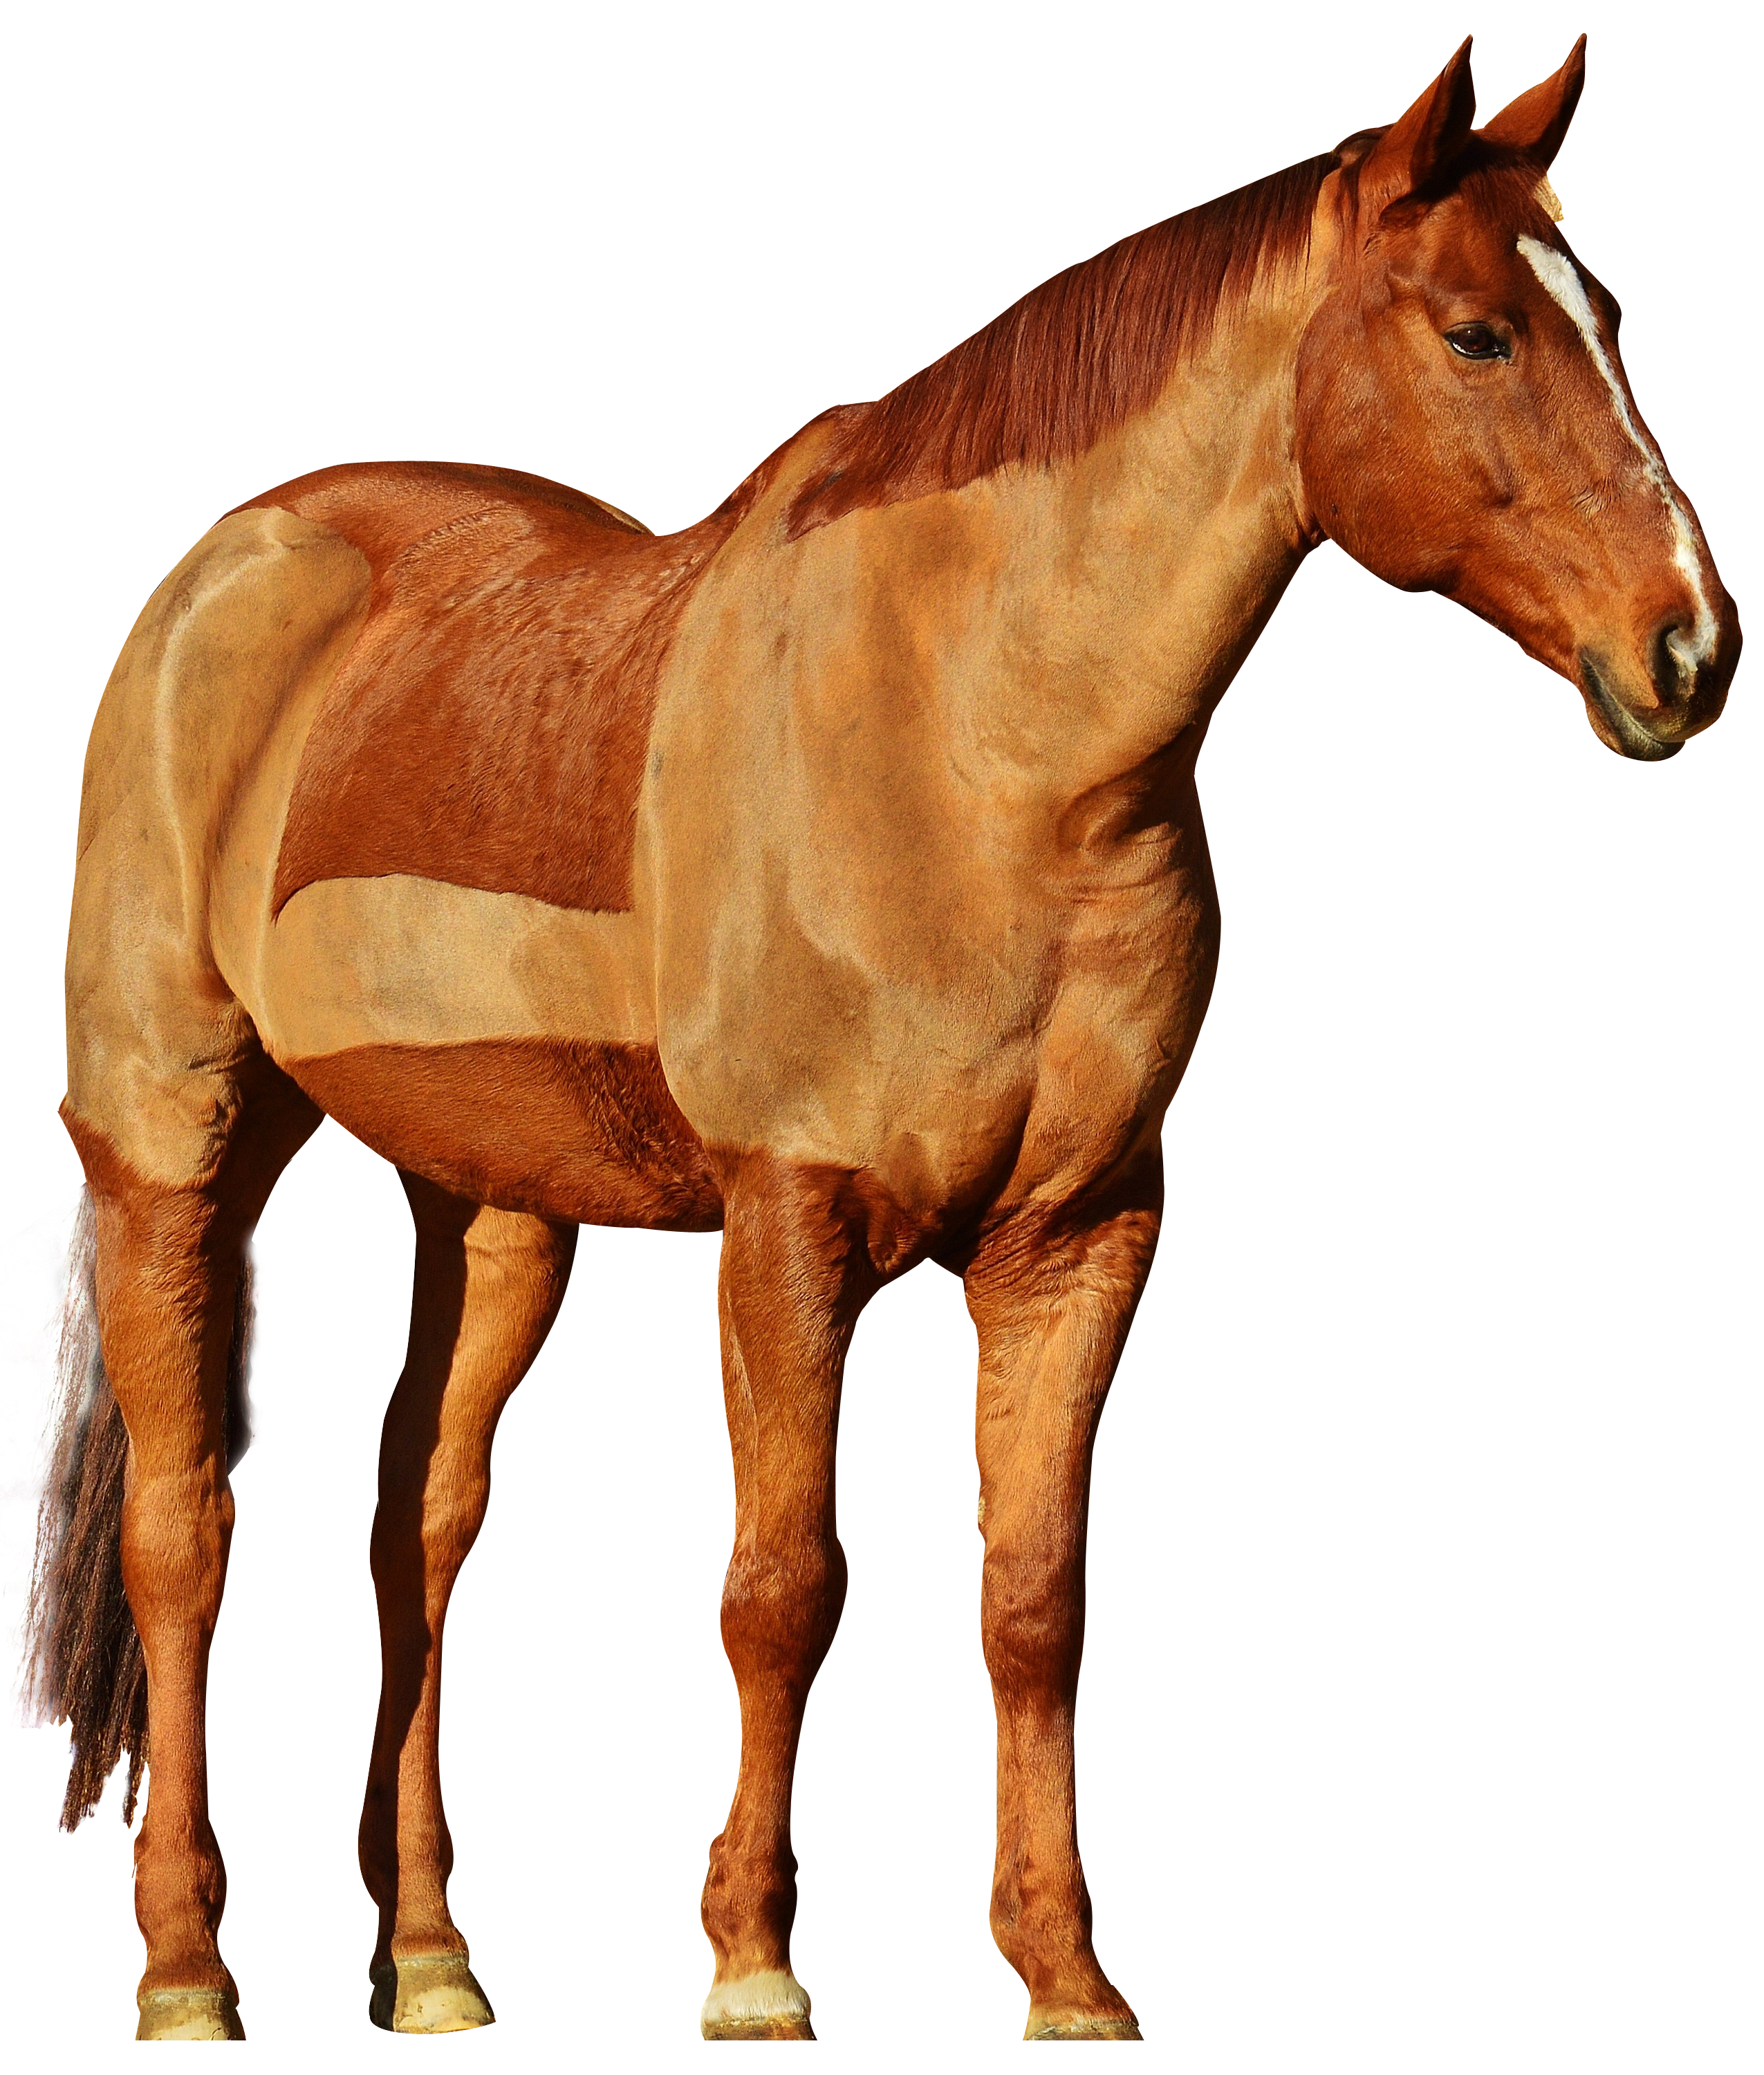 horse png image #15693